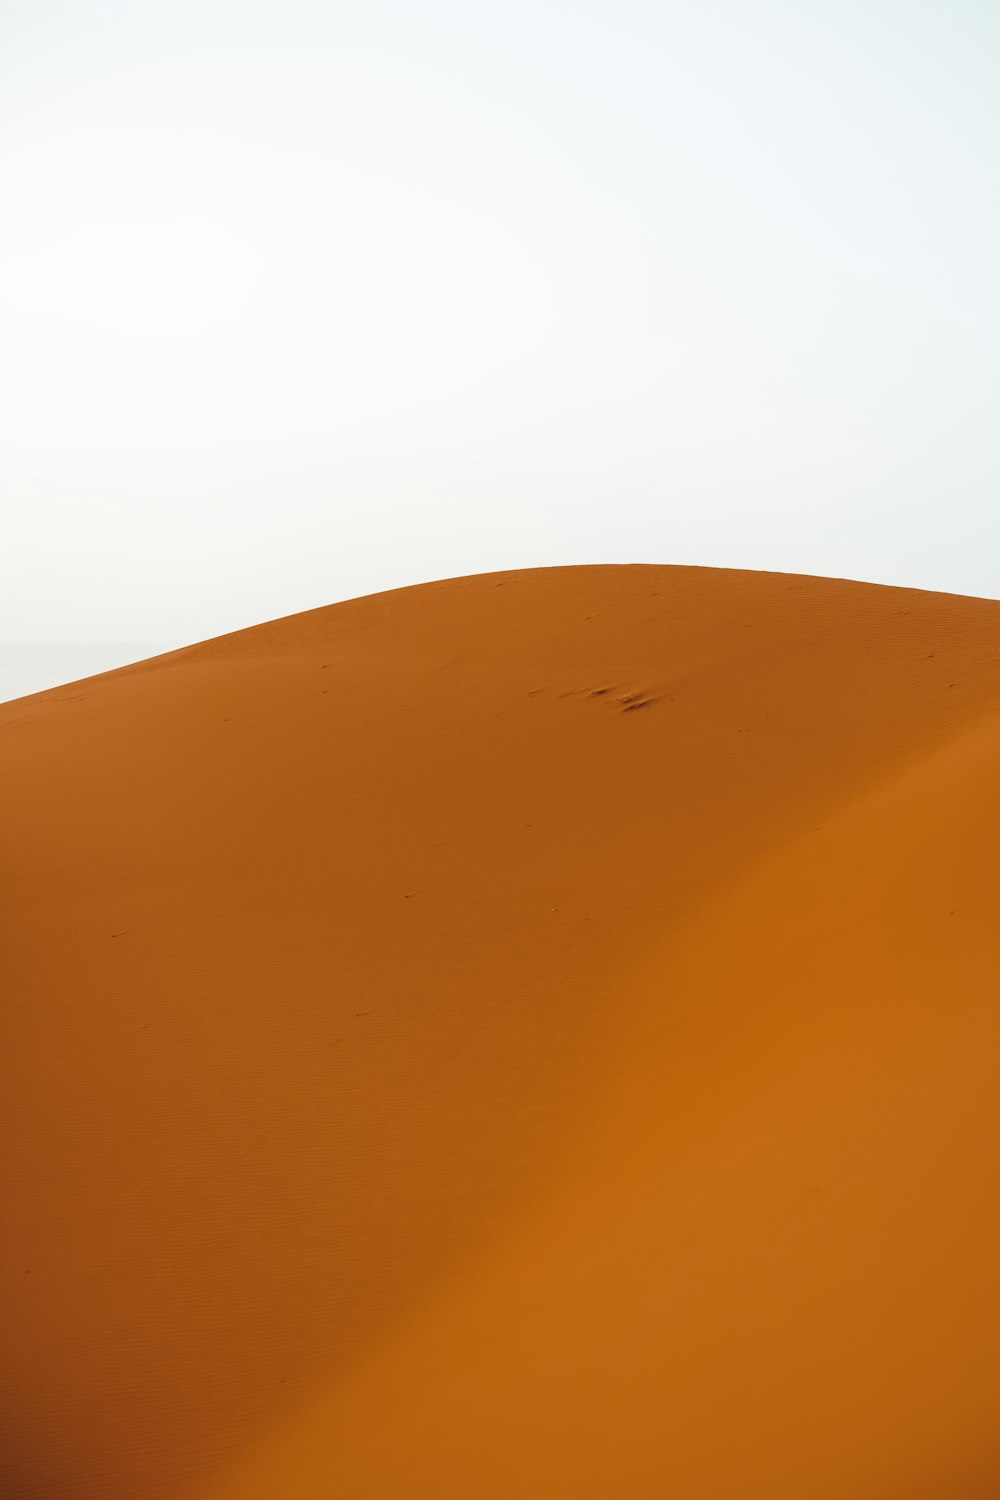 a person walking across a desert with a sky background